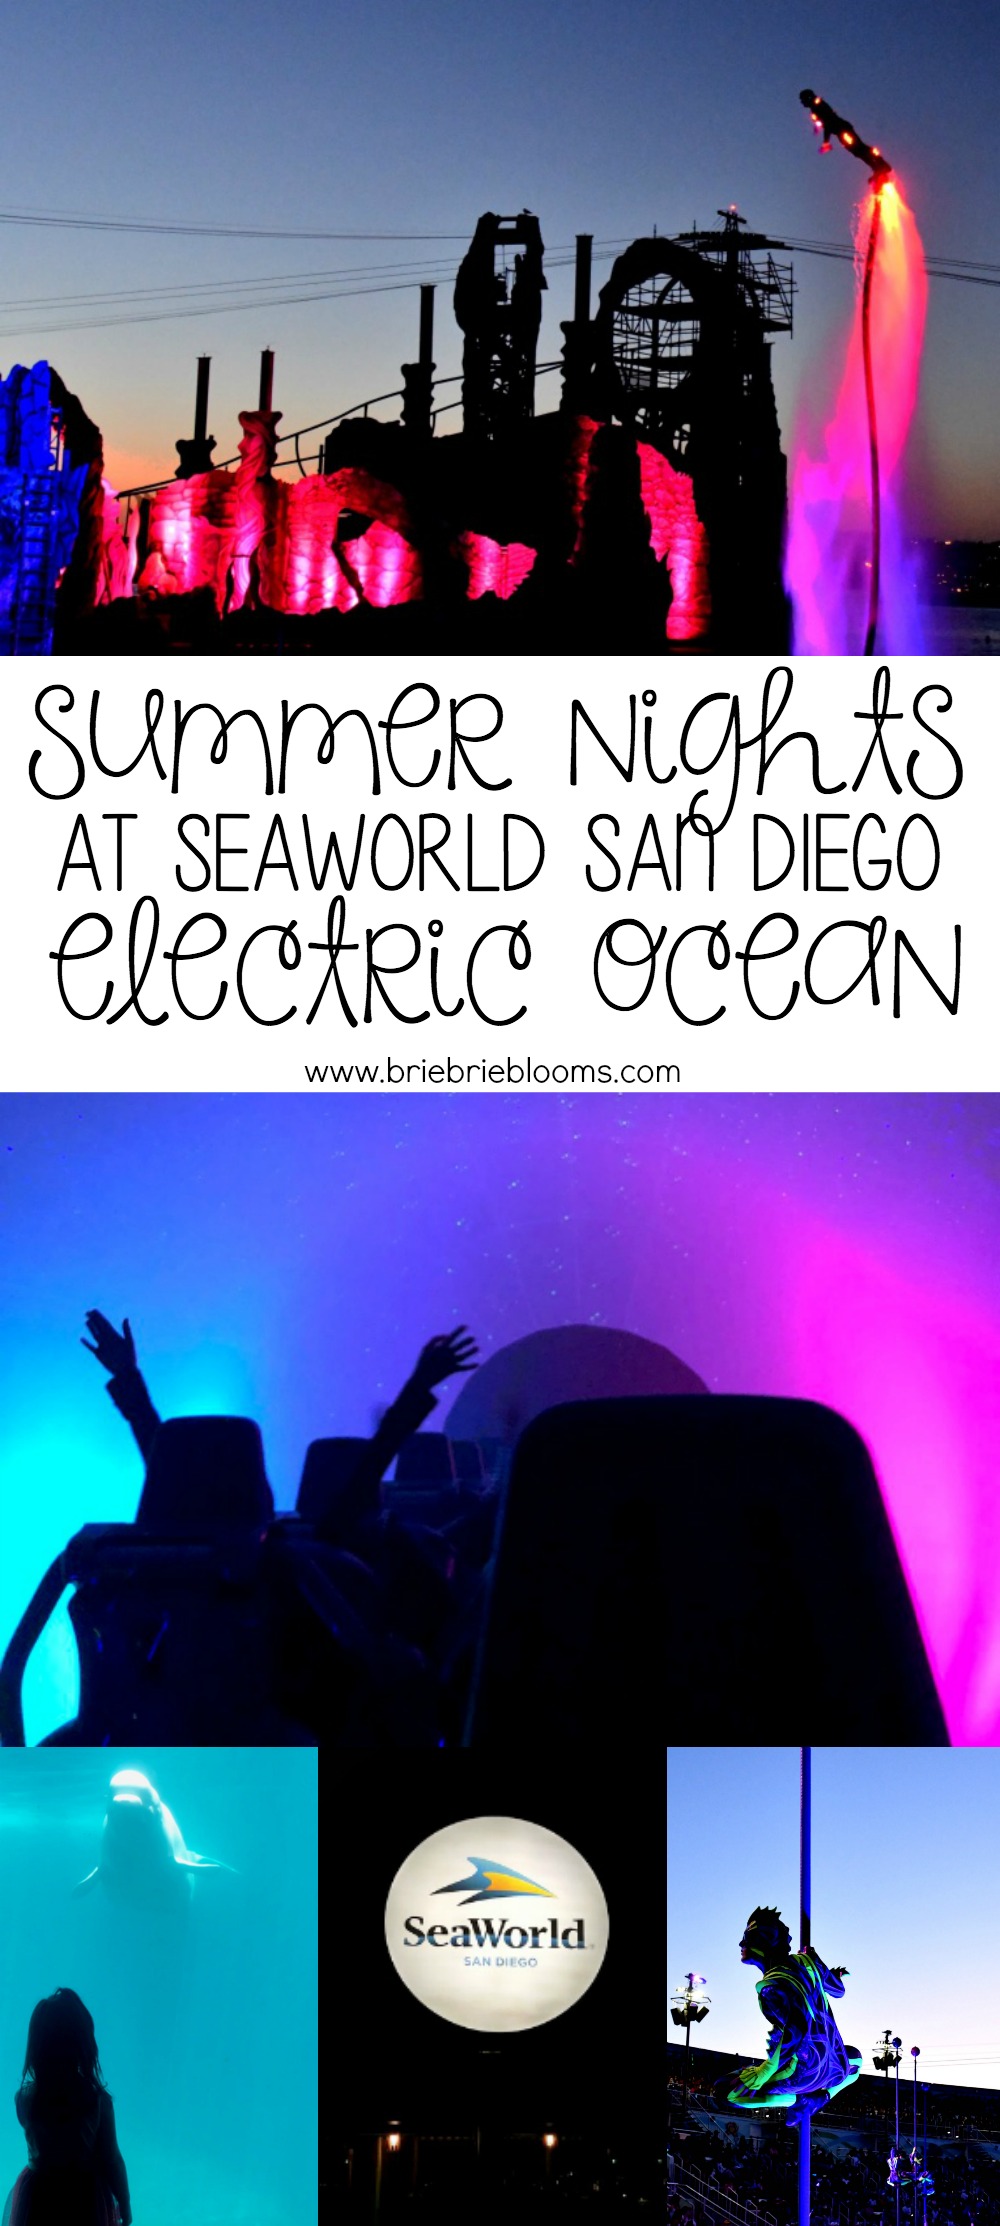 See our favorite things to do summer nights at SeaWorld San Diego during the Electric Ocean celebration.